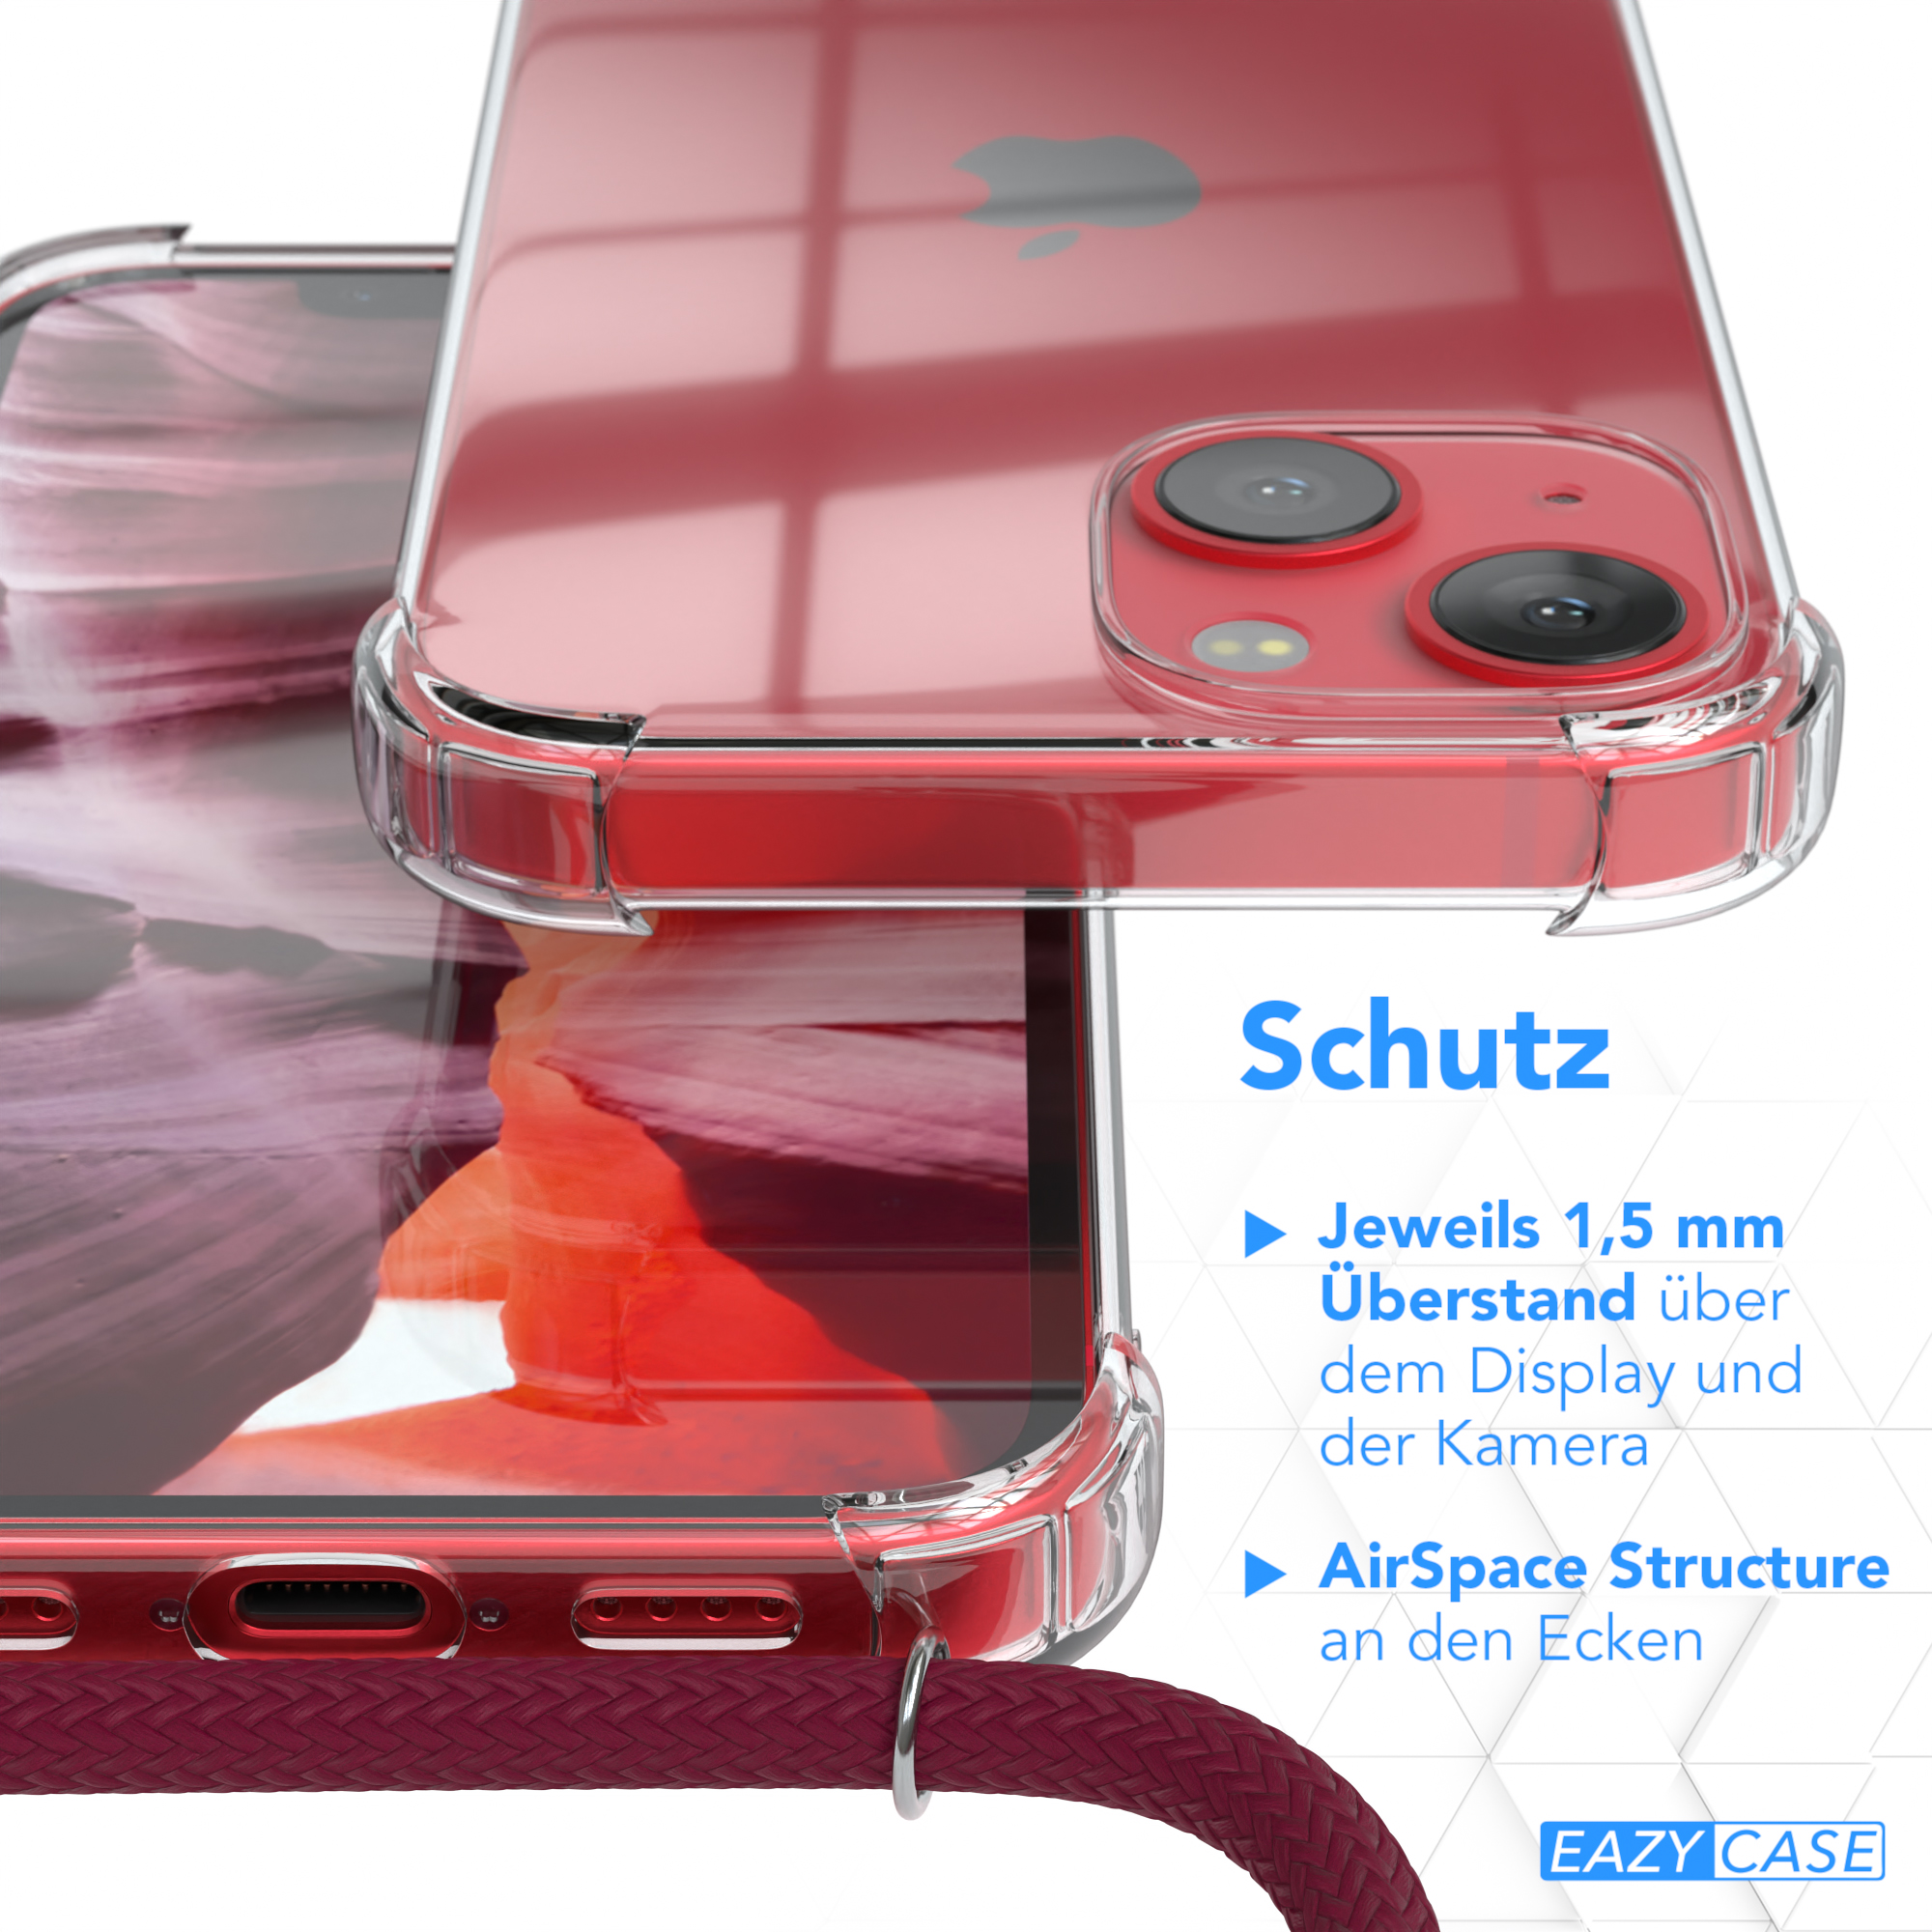 EAZY CASE Bordeaux / Clips Umhängetasche, 13 Clear Apple, Umhängeband, iPhone Rot mit Cover Silber Mini